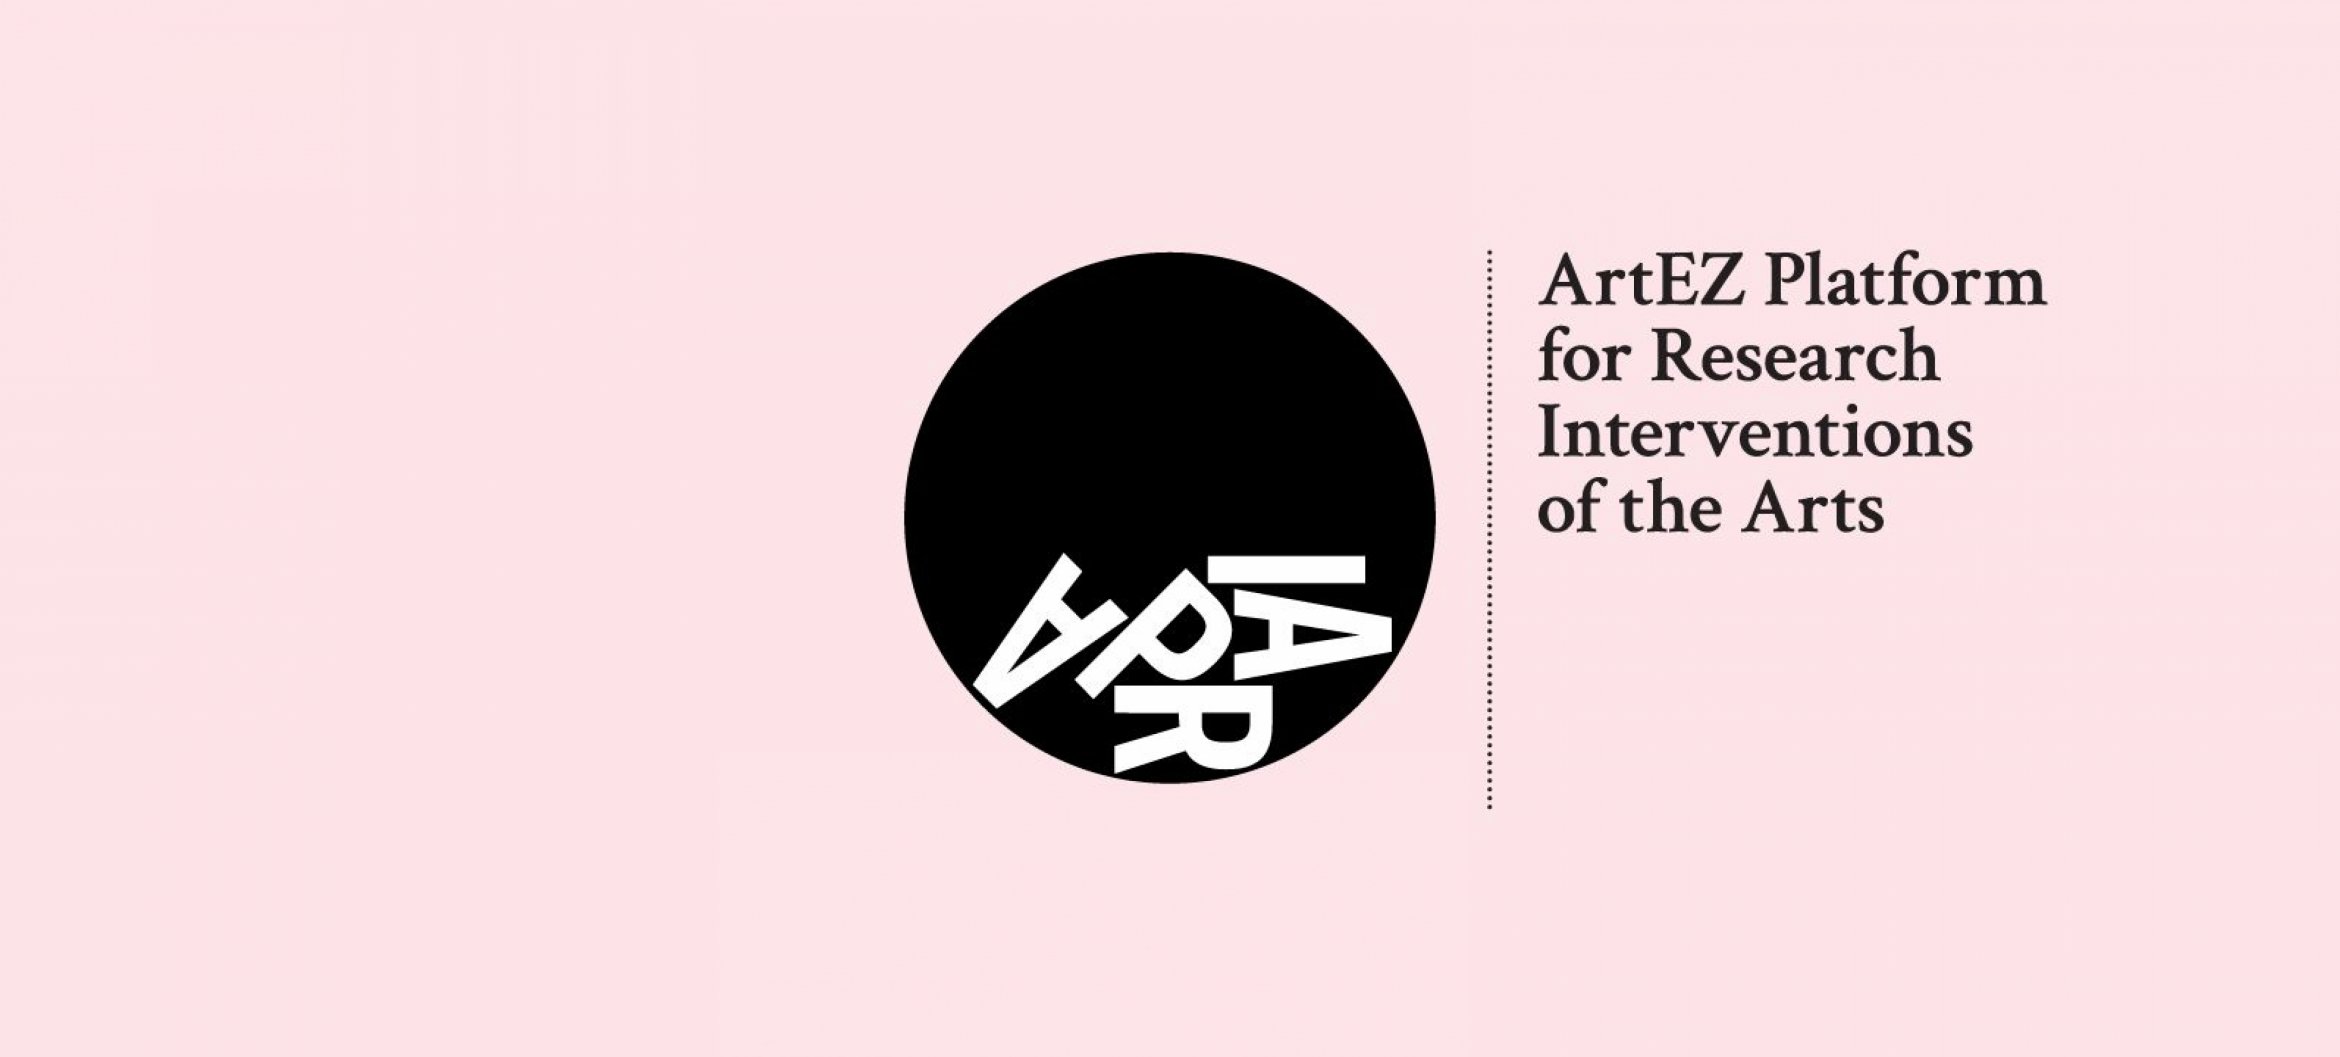 Apria, new platform for Research Interventions of the Arts